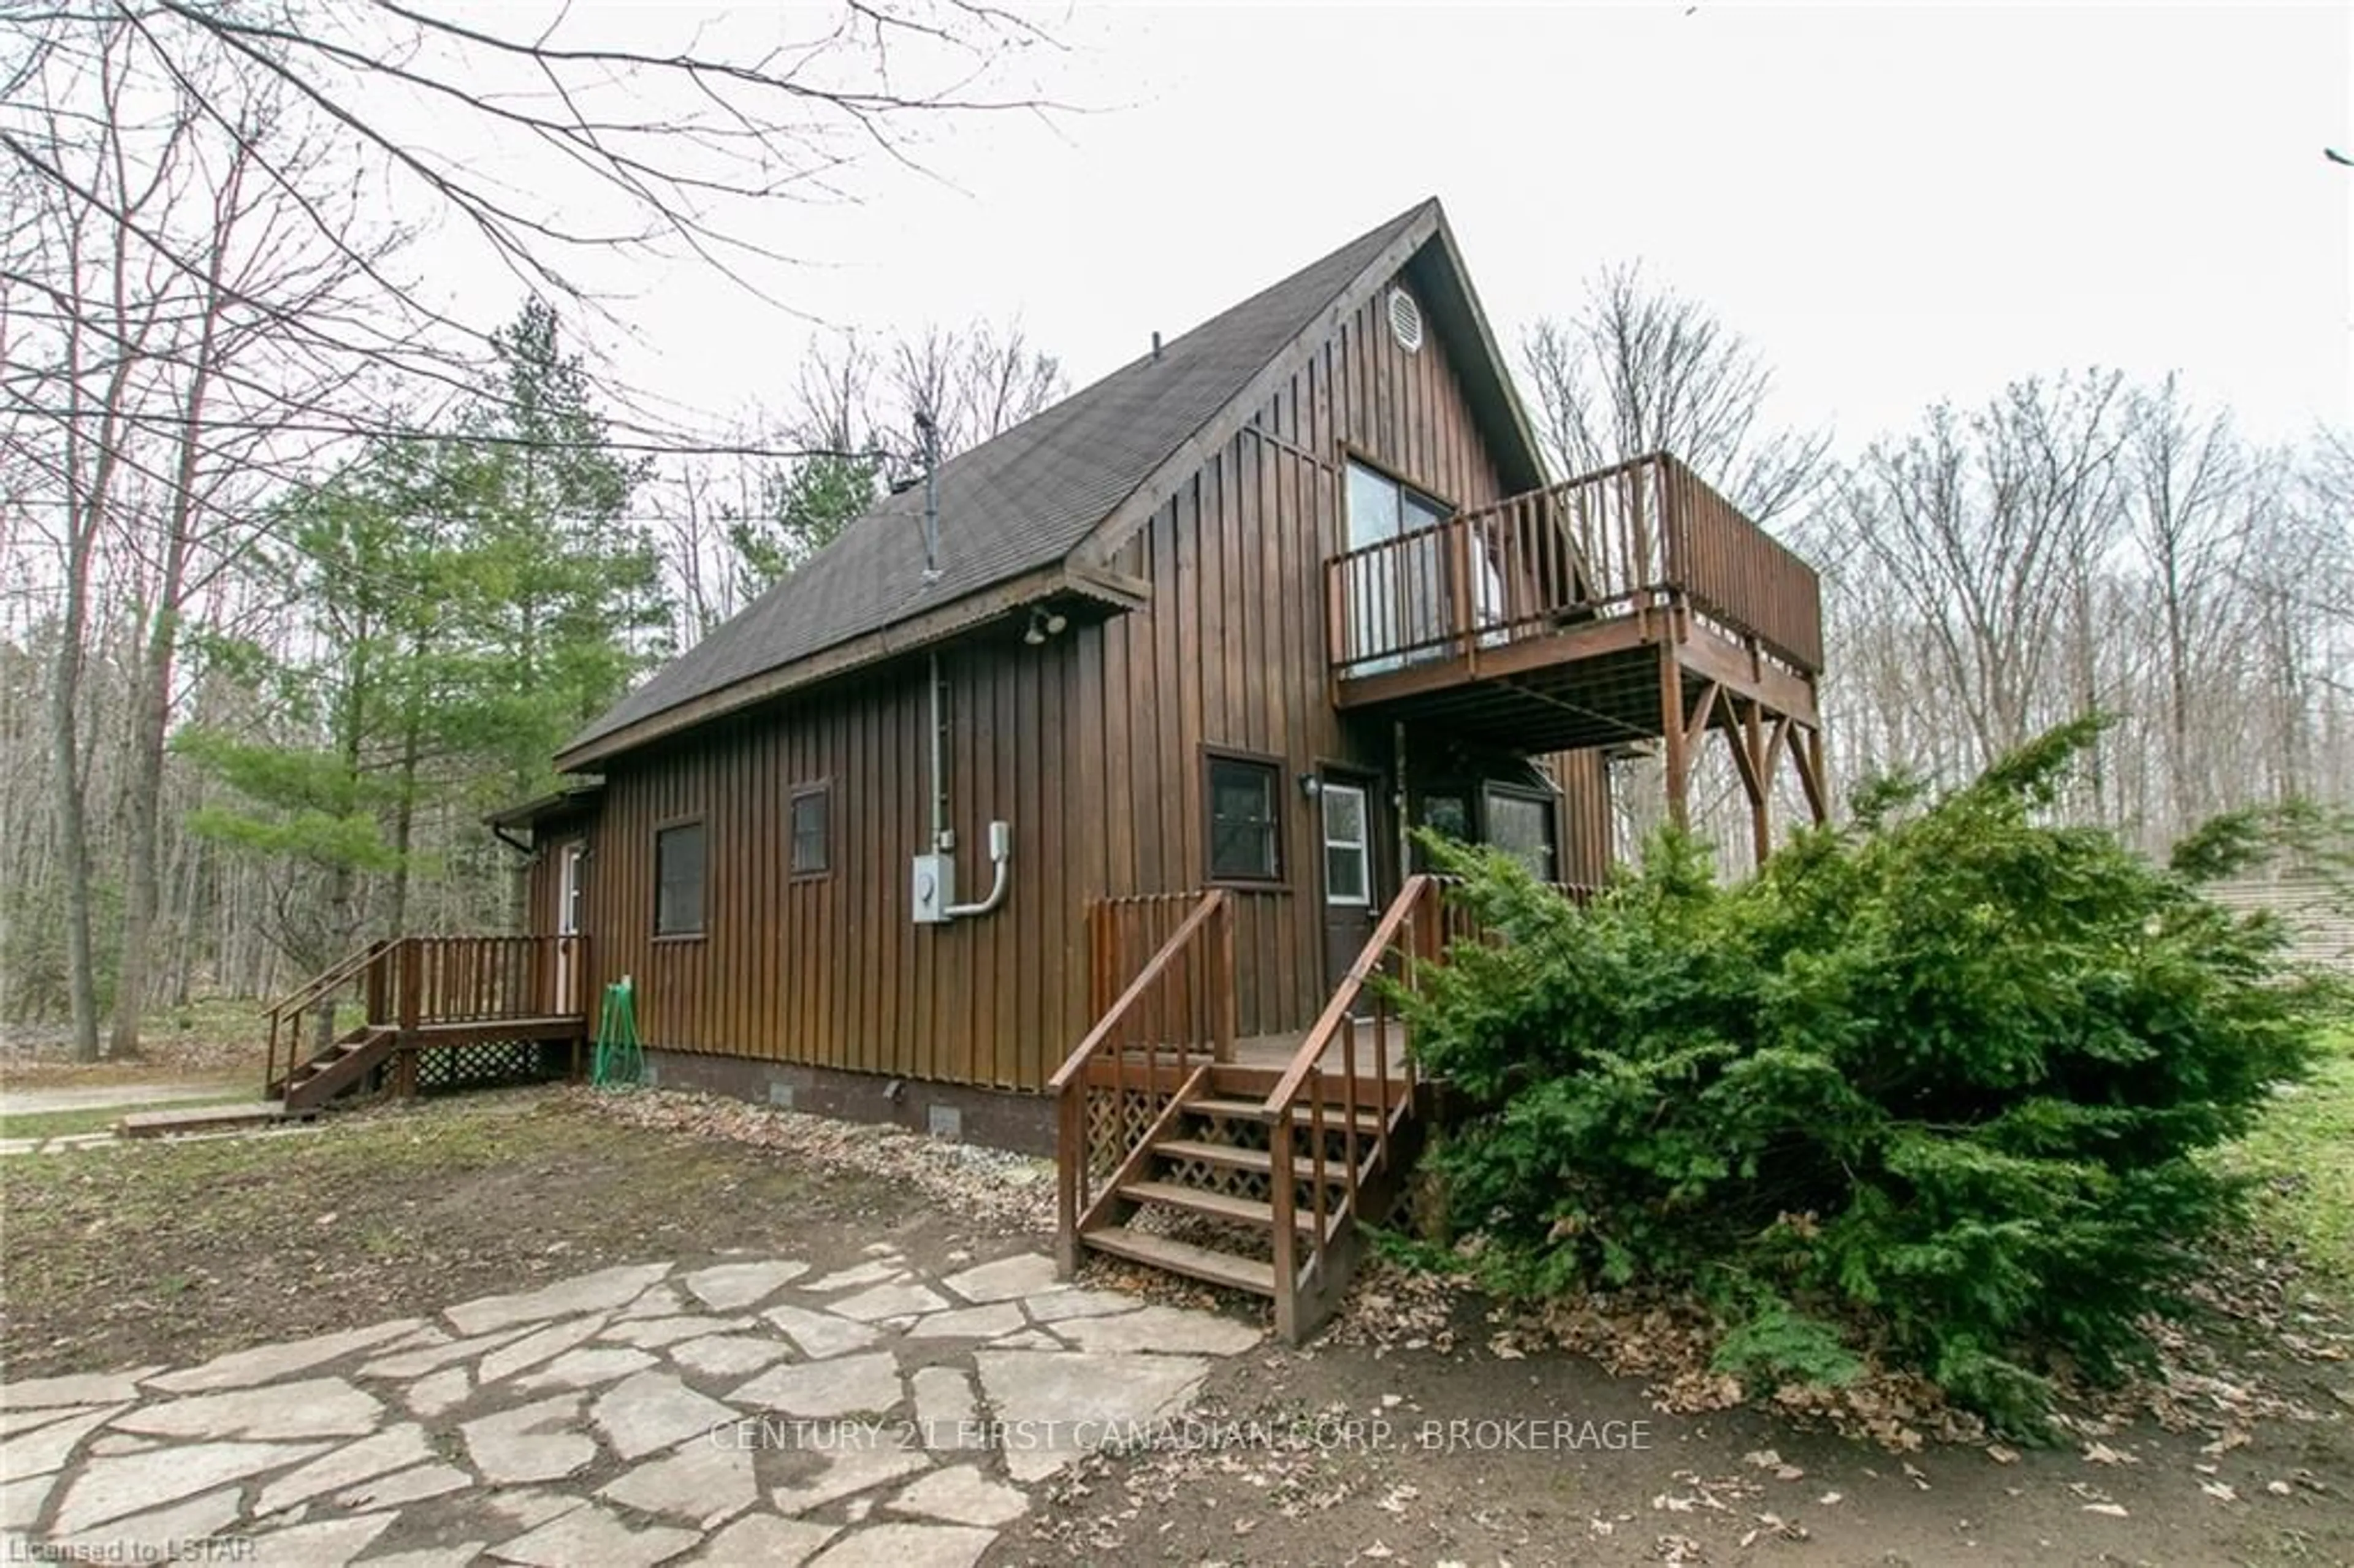 Cottage for 2096 Bruce Road 9, Northern Bruce Peninsula Ontario N0H 1W0